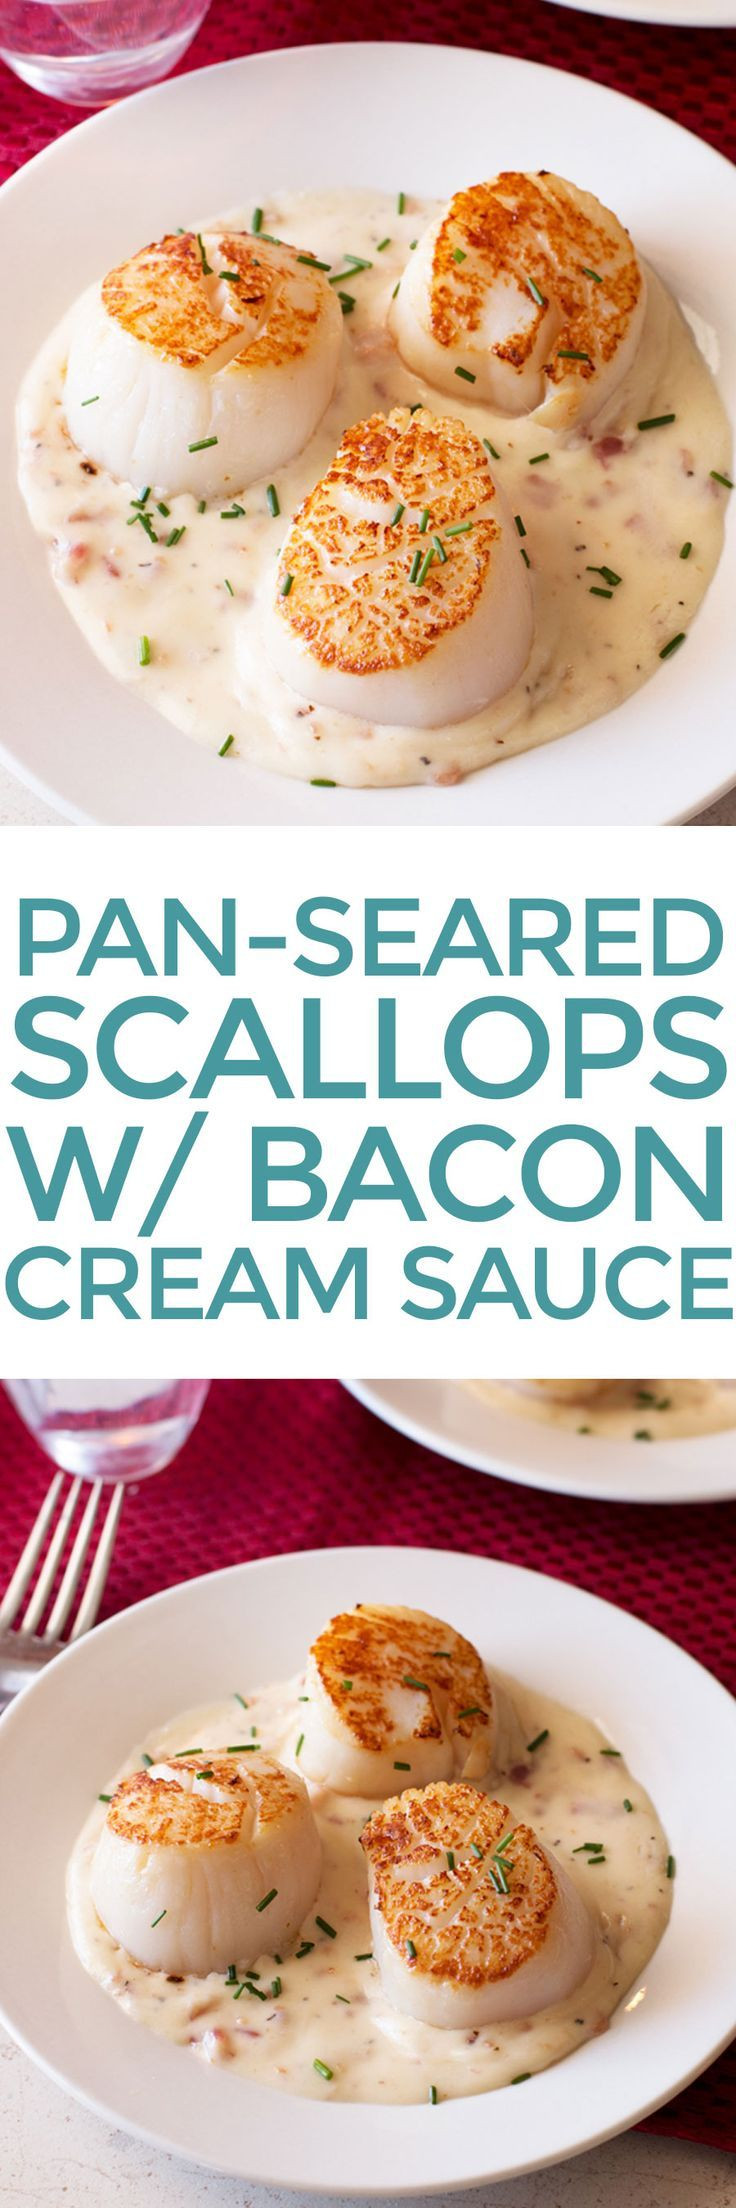 Low Carb Scallop Recipes
 274 best images about Low Carb Fish Recipes on Pinterest